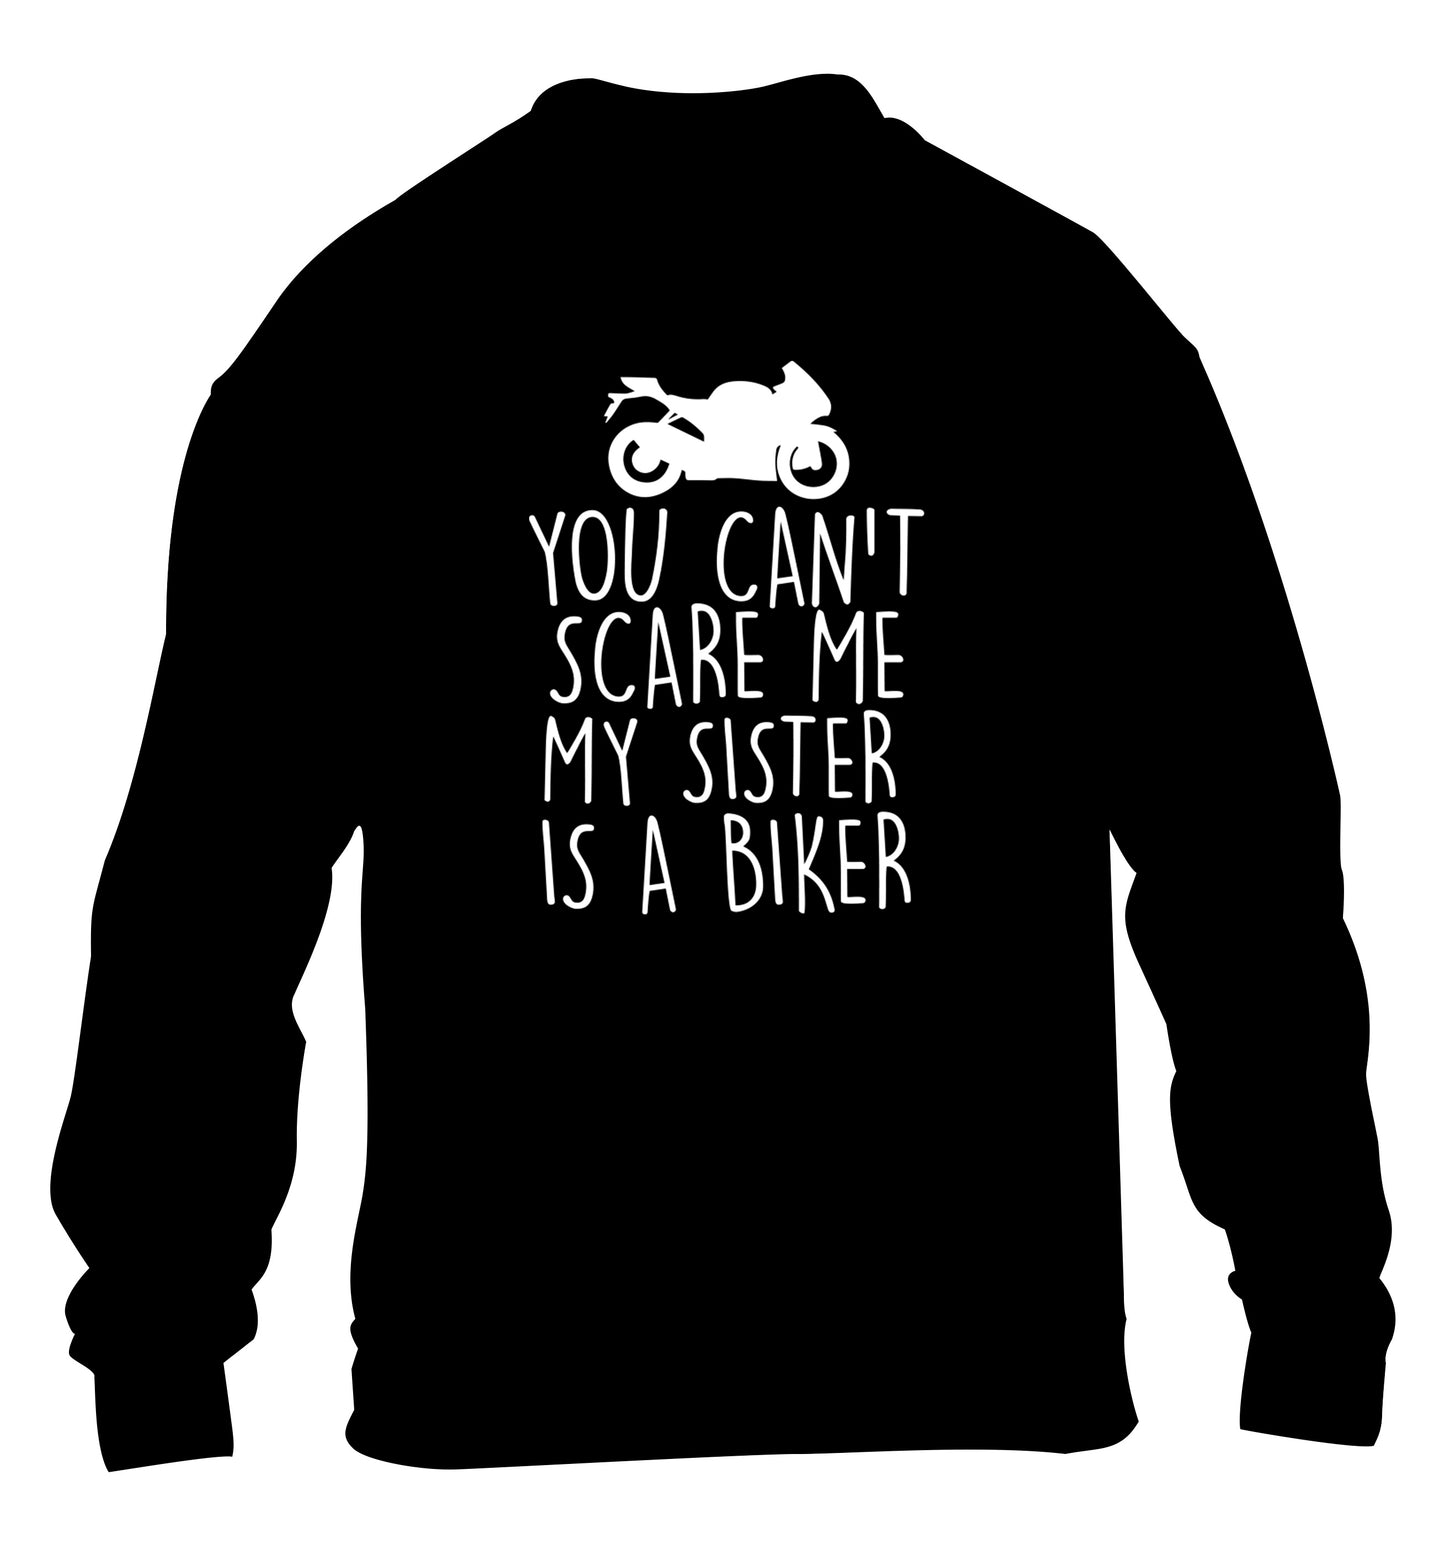 You can't scare me my sister is a biker children's black sweater 12-13 Years